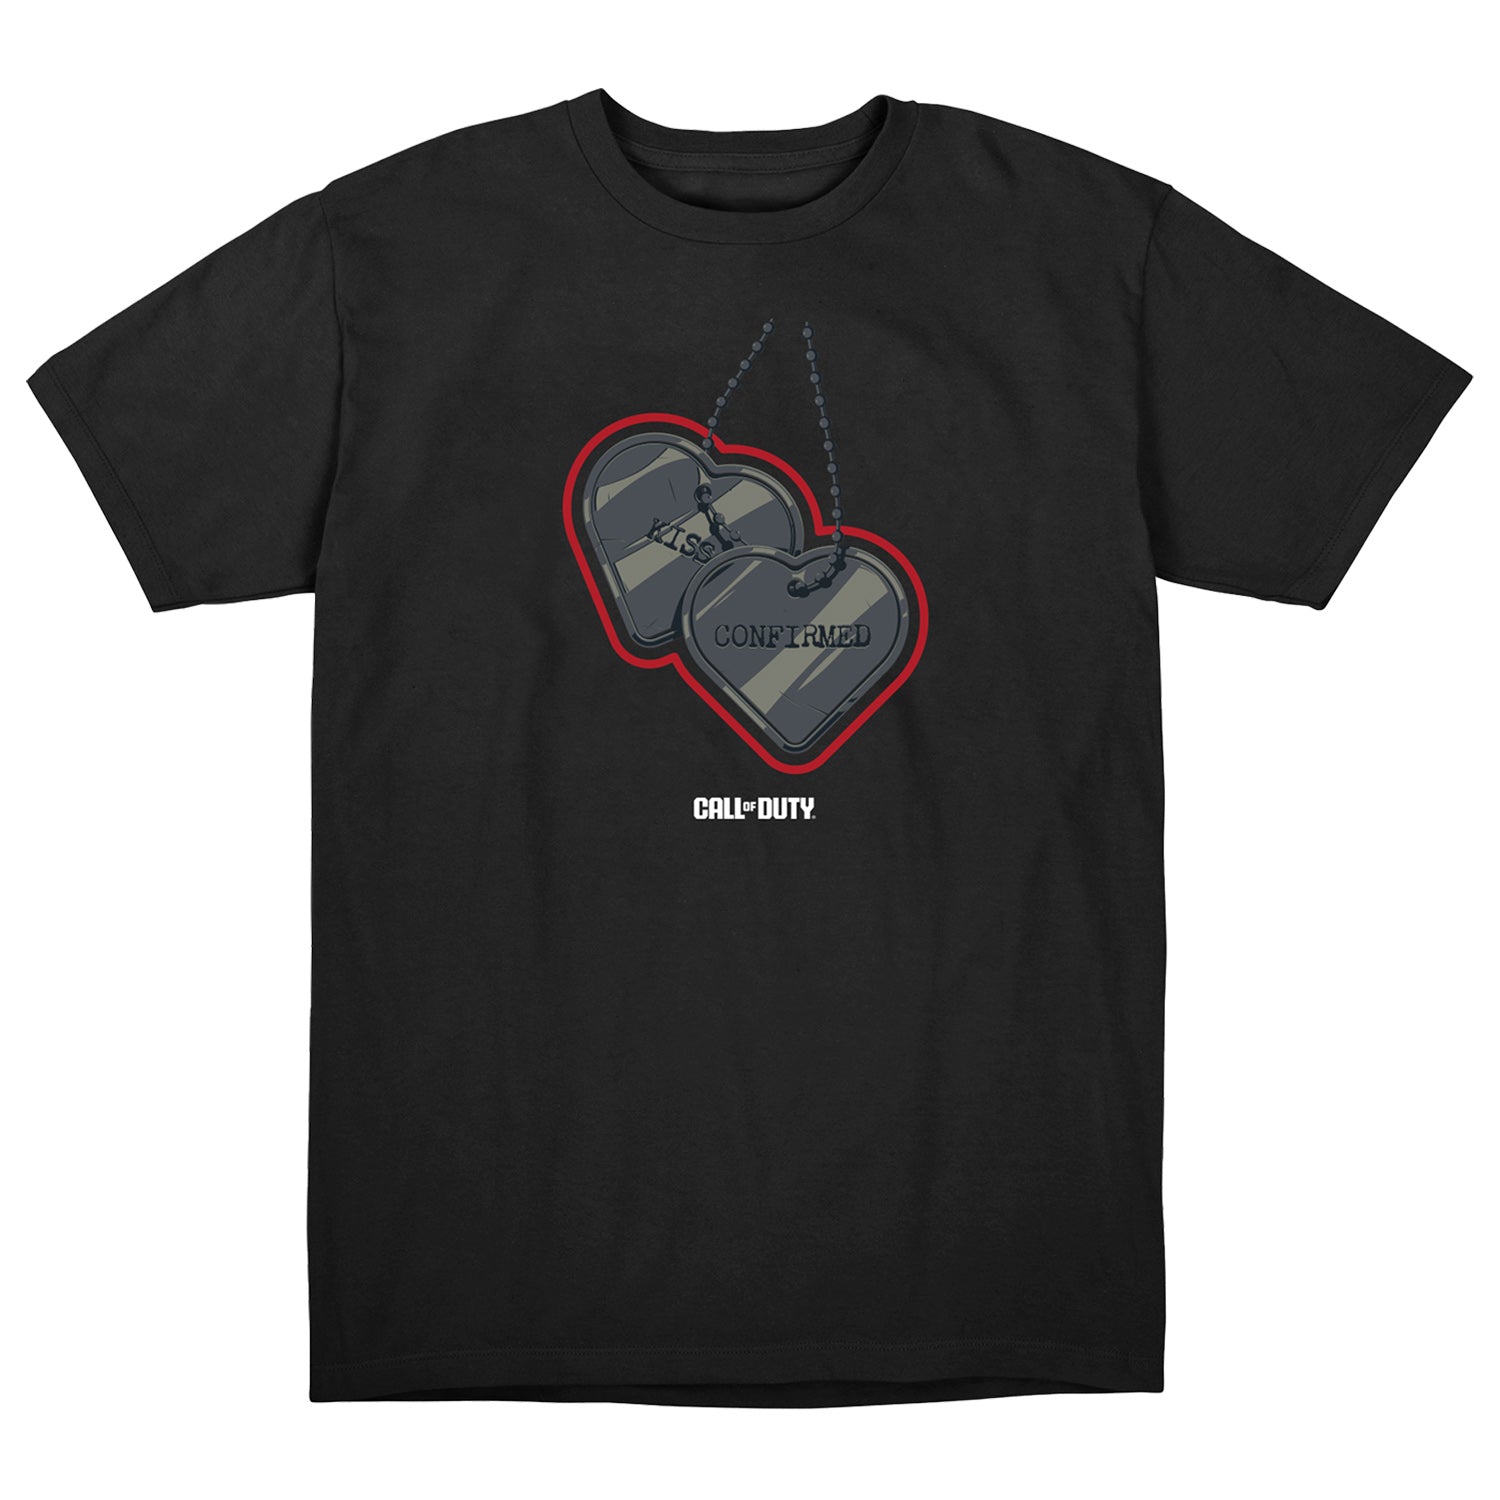 Call of Duty Kiss Confirmed T-Shirt - Front View Black Version